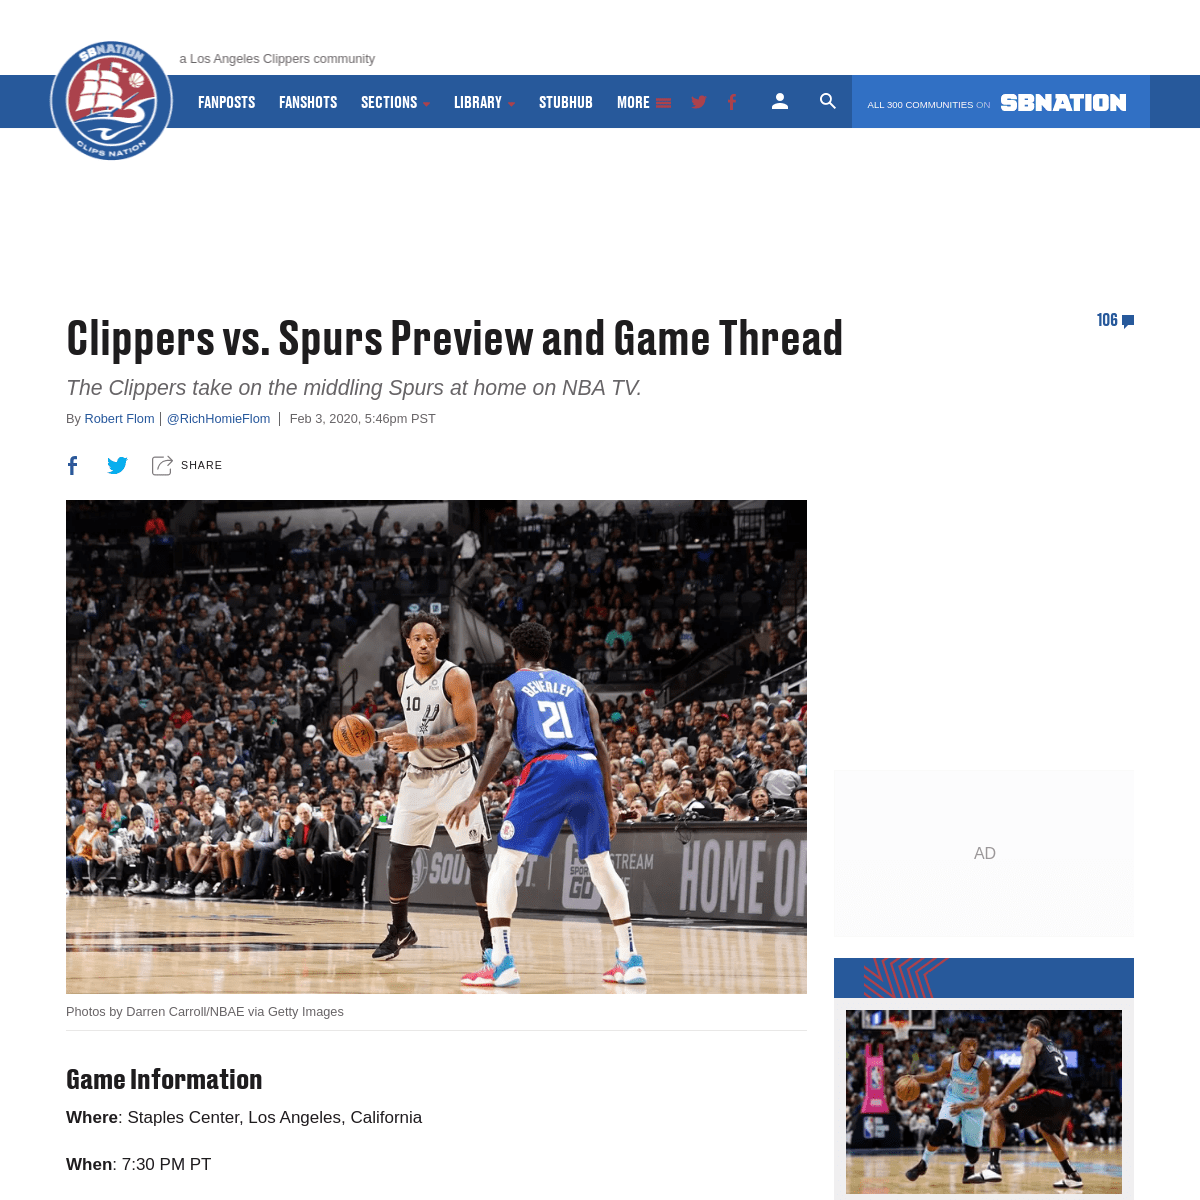 A complete backup of www.clipsnation.com/2020/2/3/21121436/clippers-vs-spurs-preview-and-game-thread